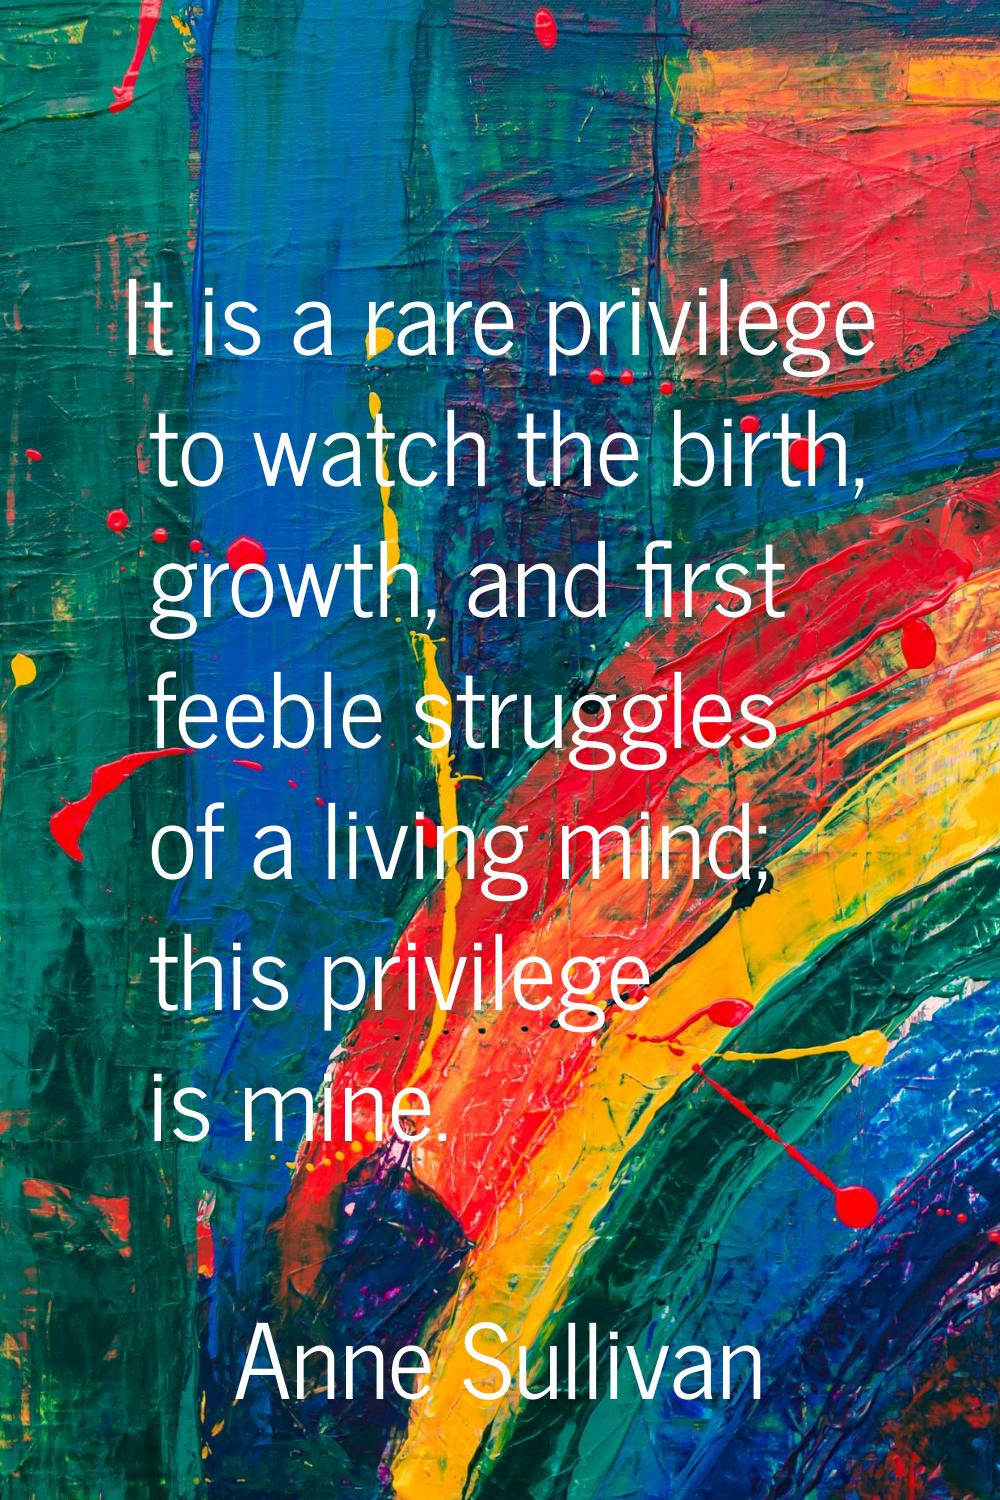 It is a rare privilege to watch the birth, growth, and first feeble struggles of a living mind; thi